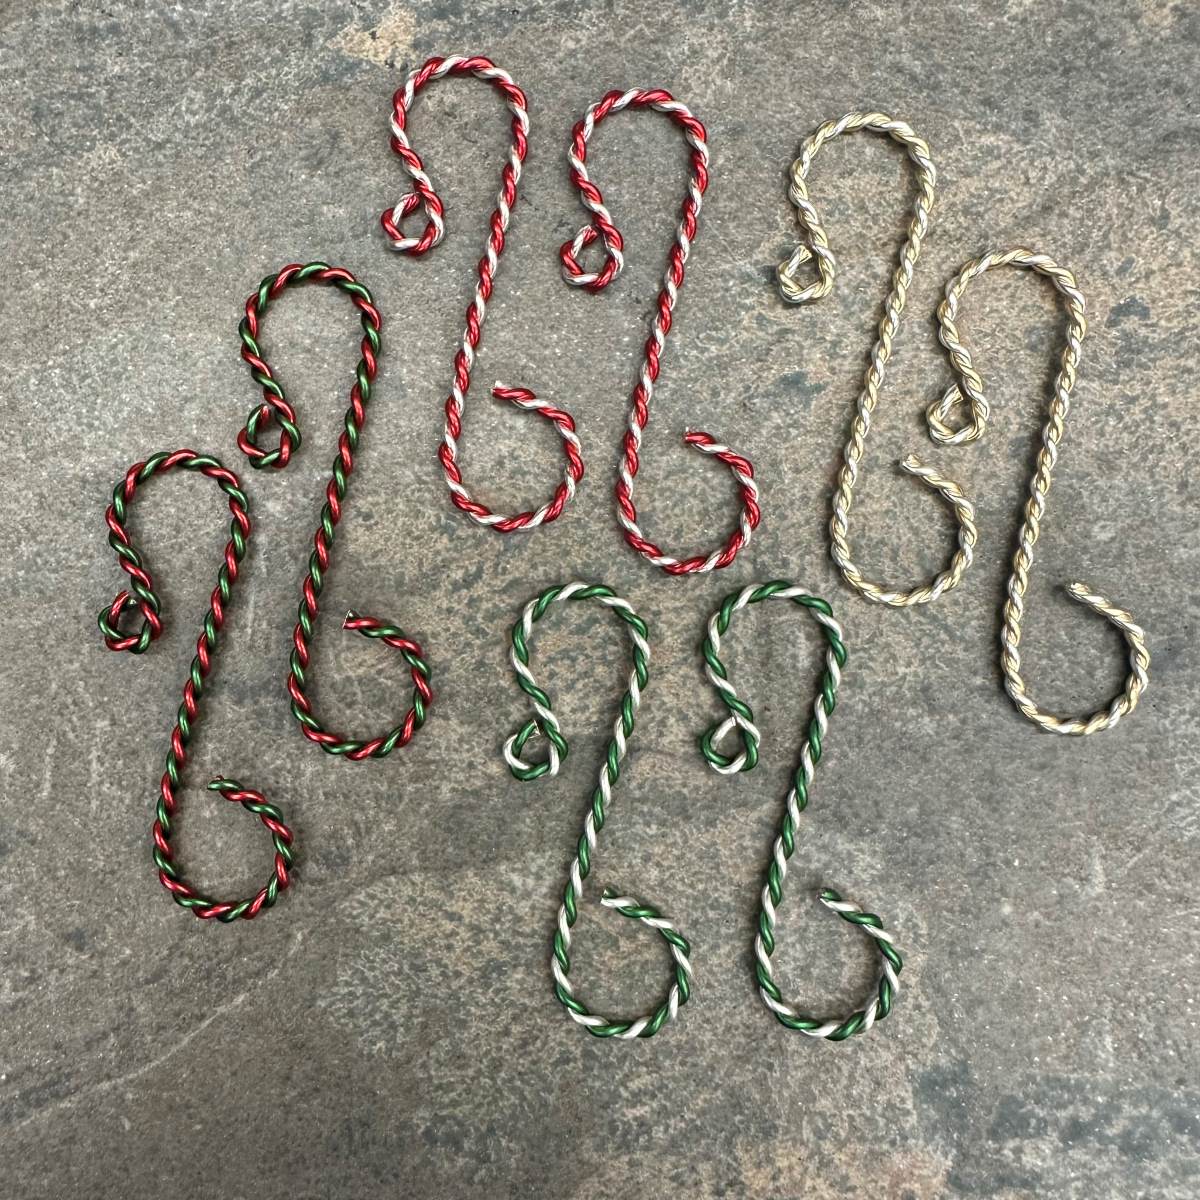 How To Store Ornament Hooks